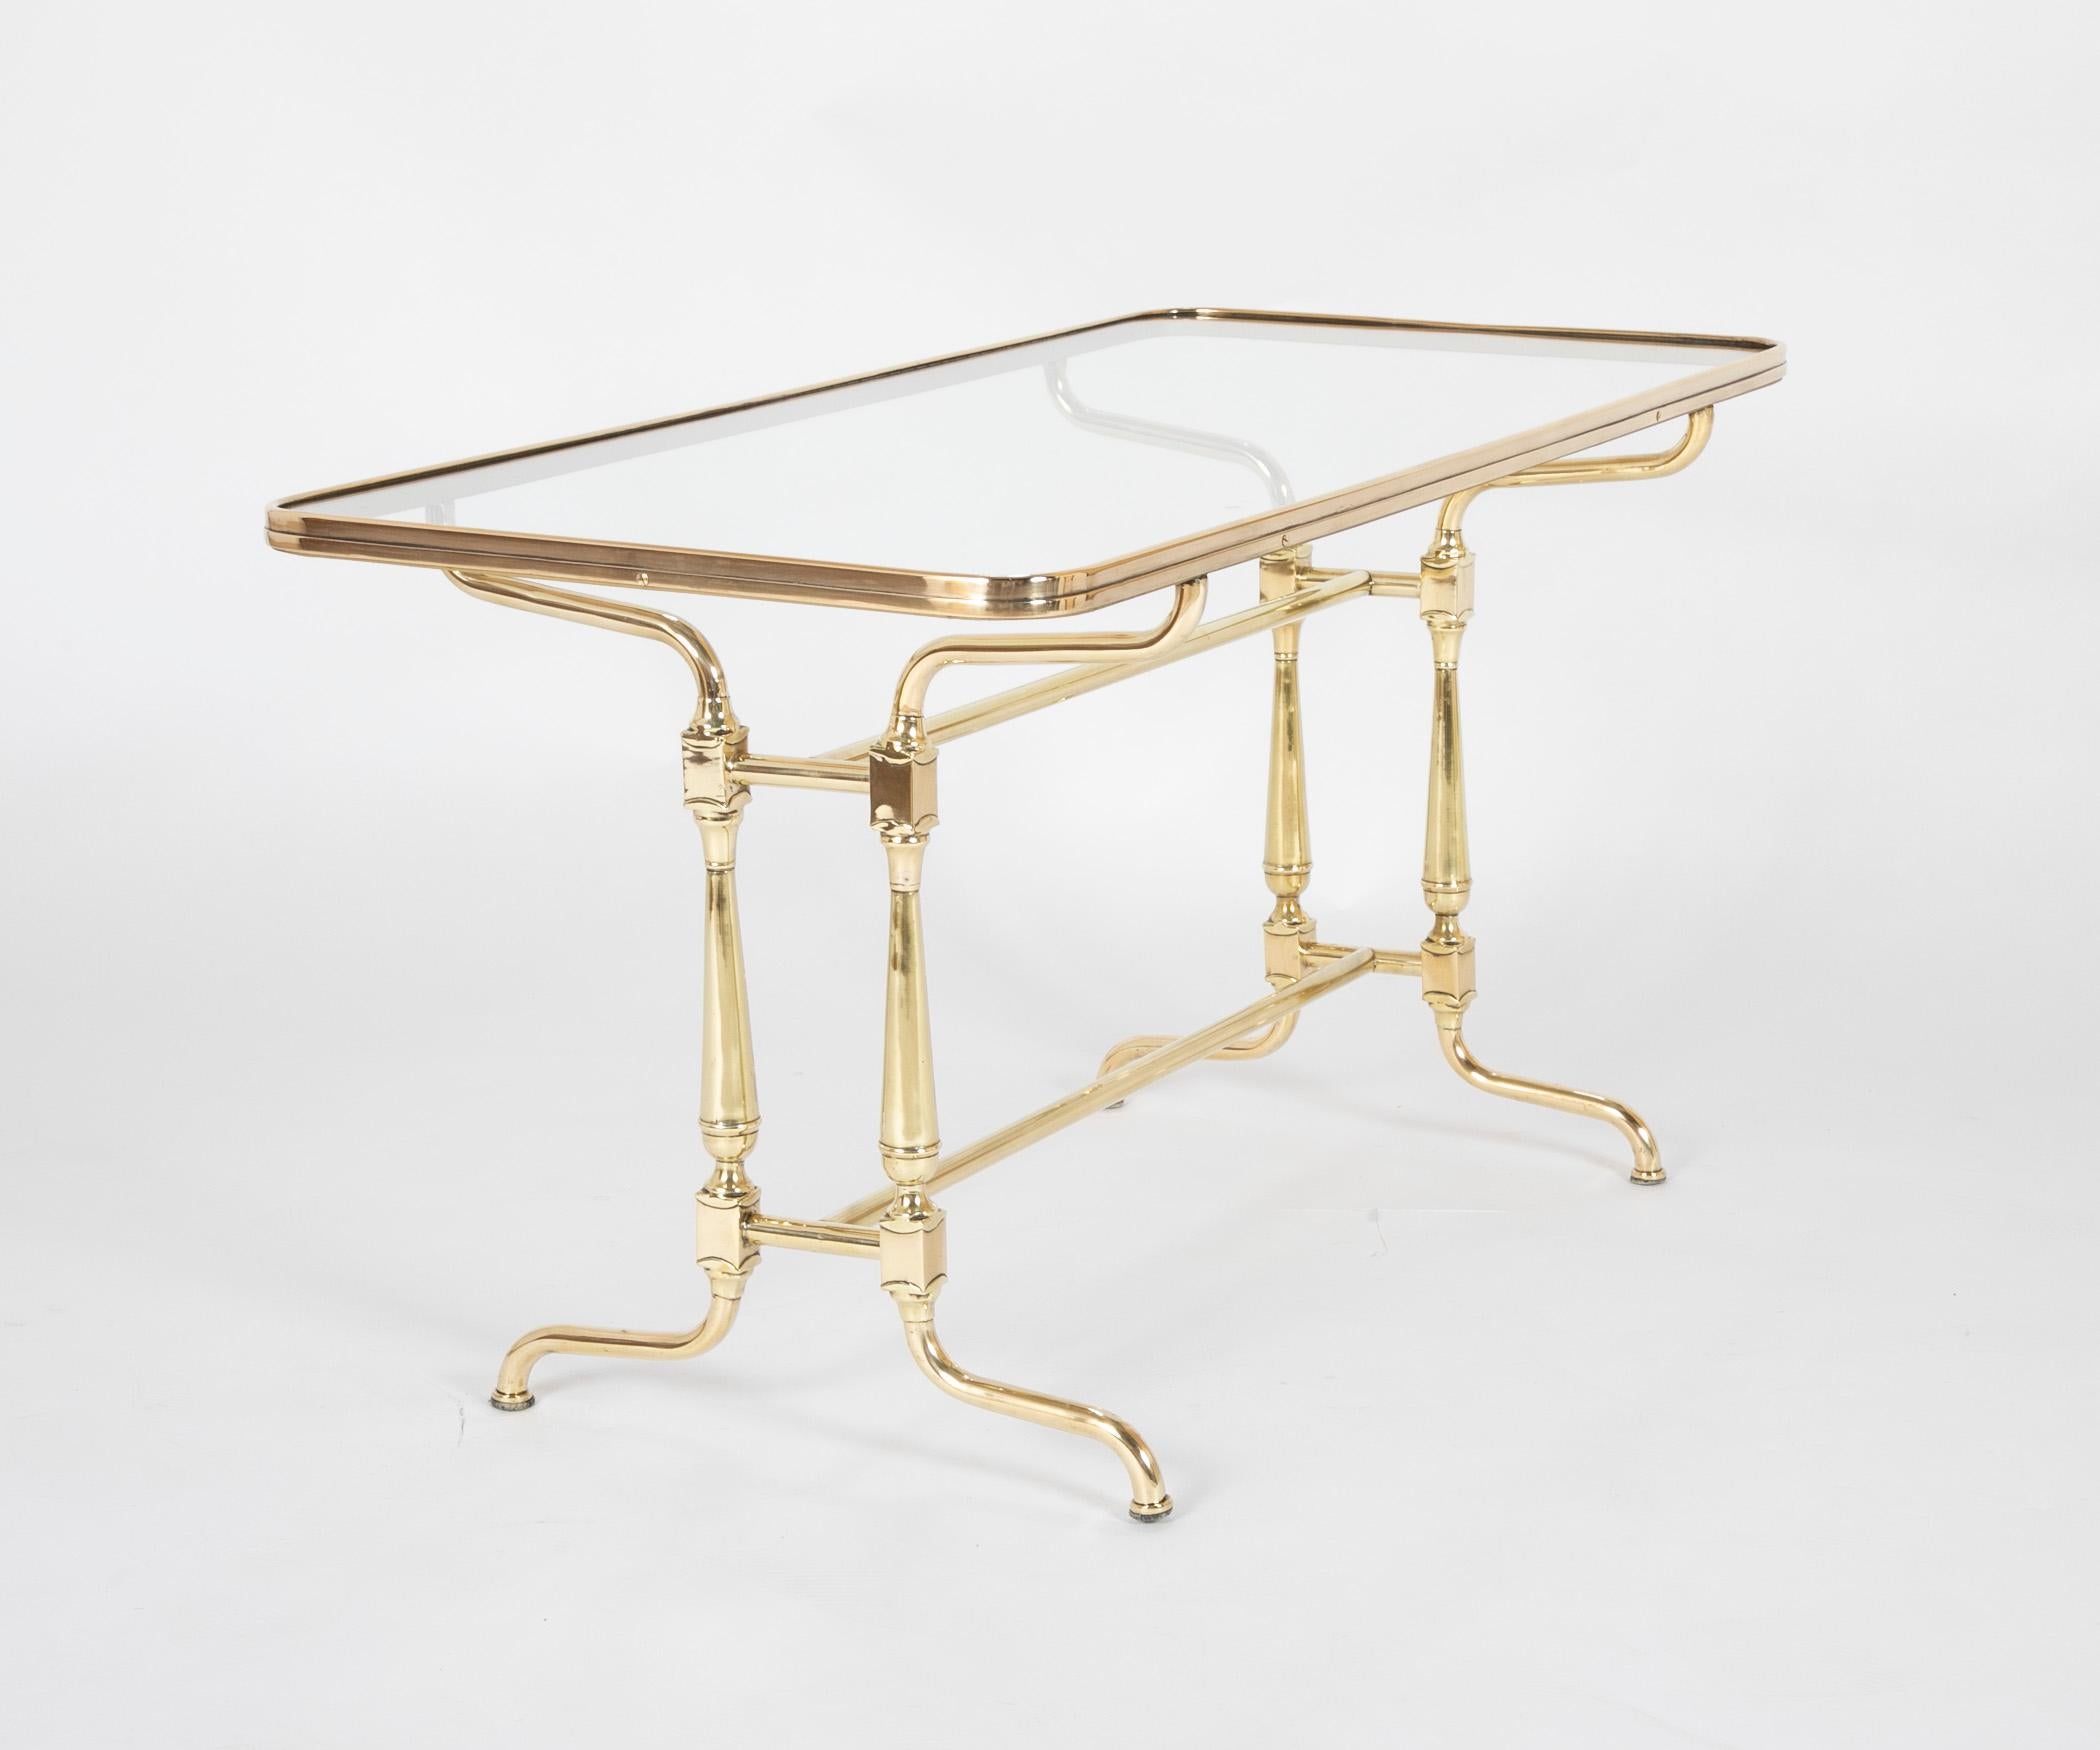 An early 20th century French glass top brass coffee table, circa 1910.